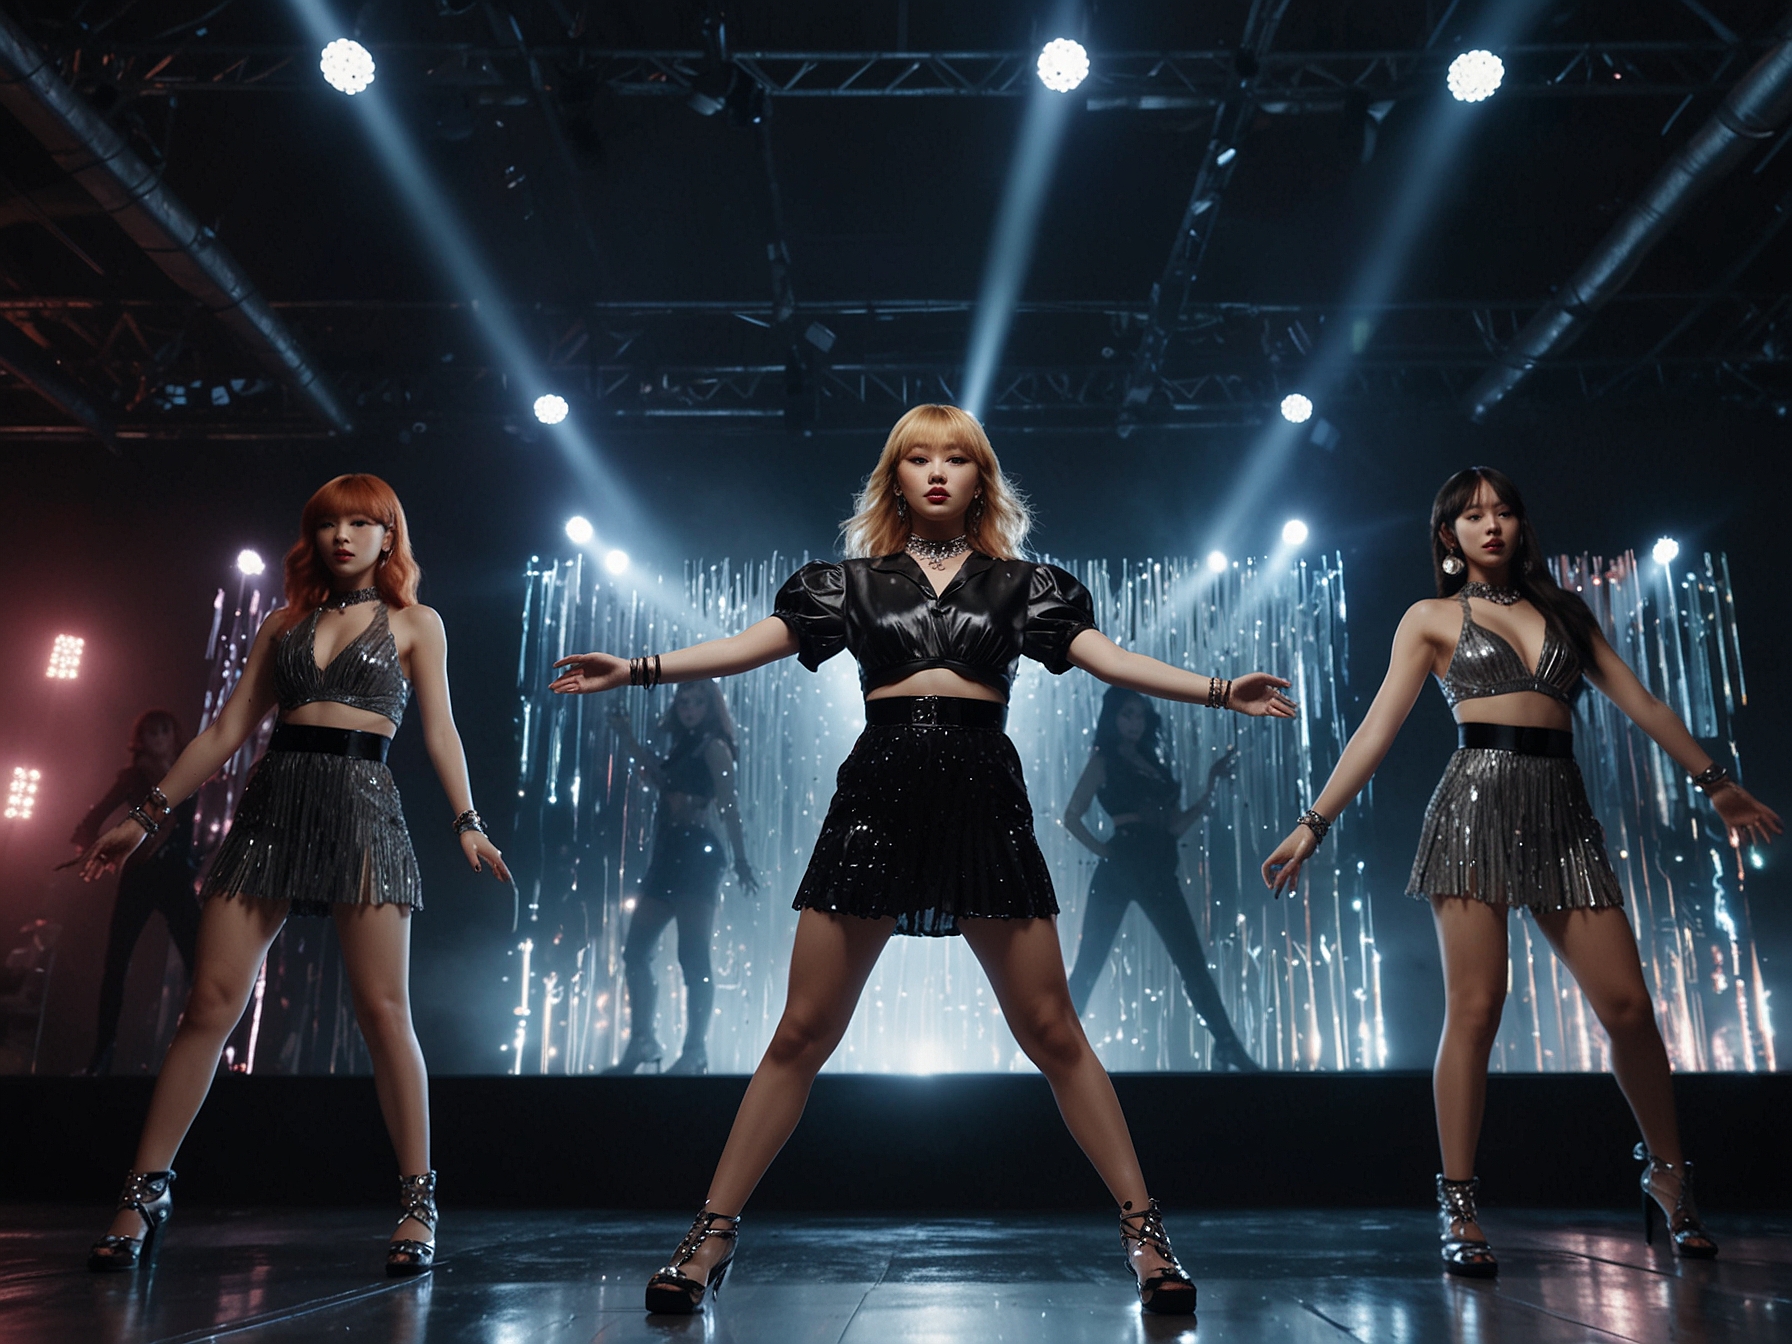 BABYMONSTER members performing synchronized dance moves in the ‘FOREVER’ MV, highlighting their dynamic energy and meticulous choreography against a backdrop of shimmering sequences.